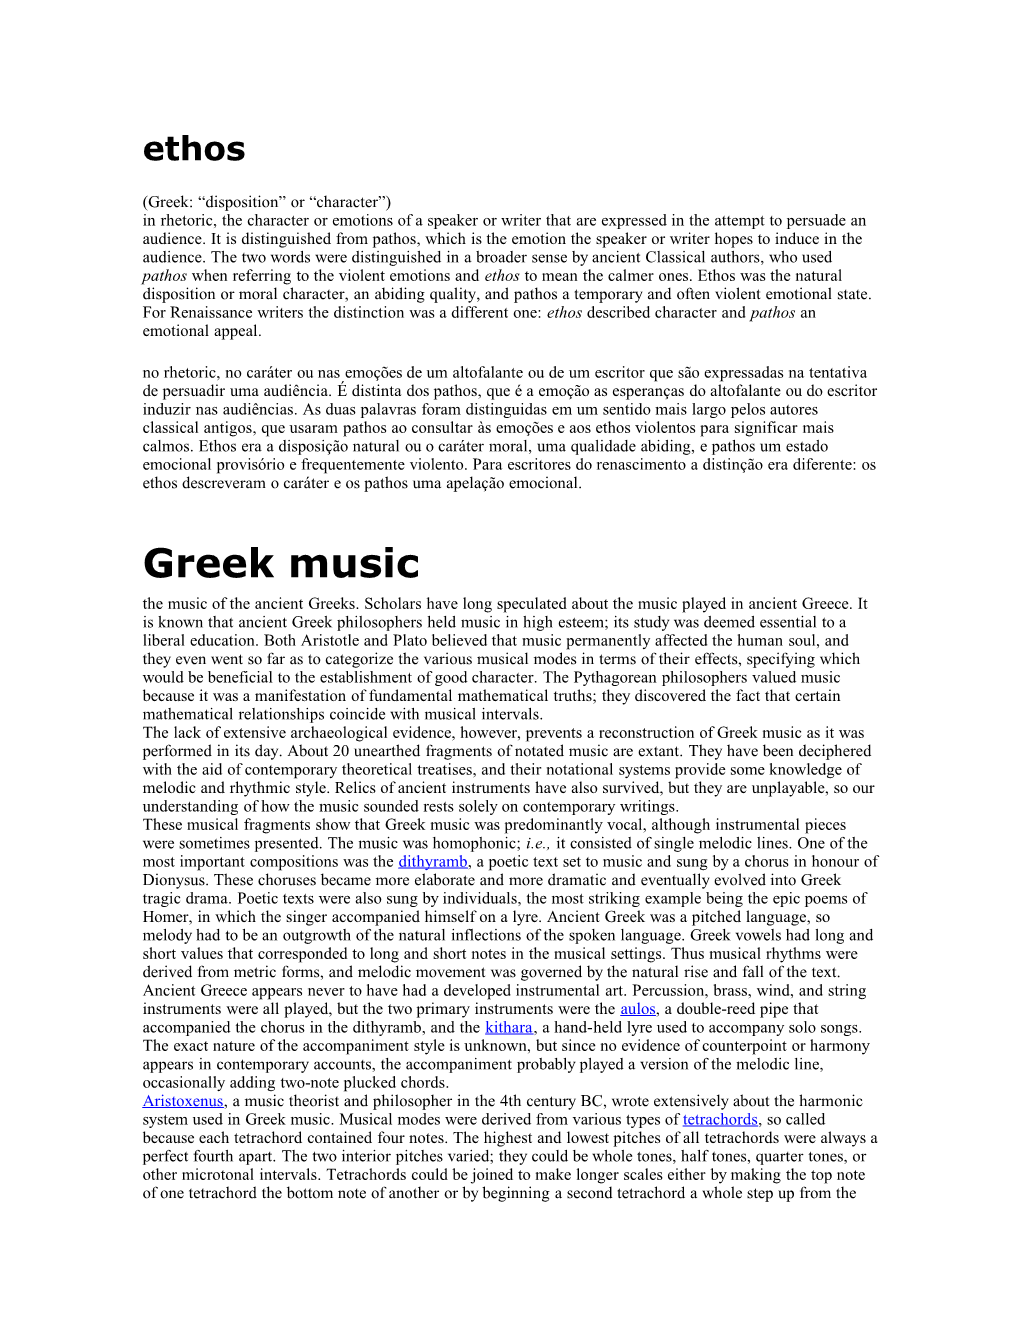 Greek Music the Music of the Ancient Greeks